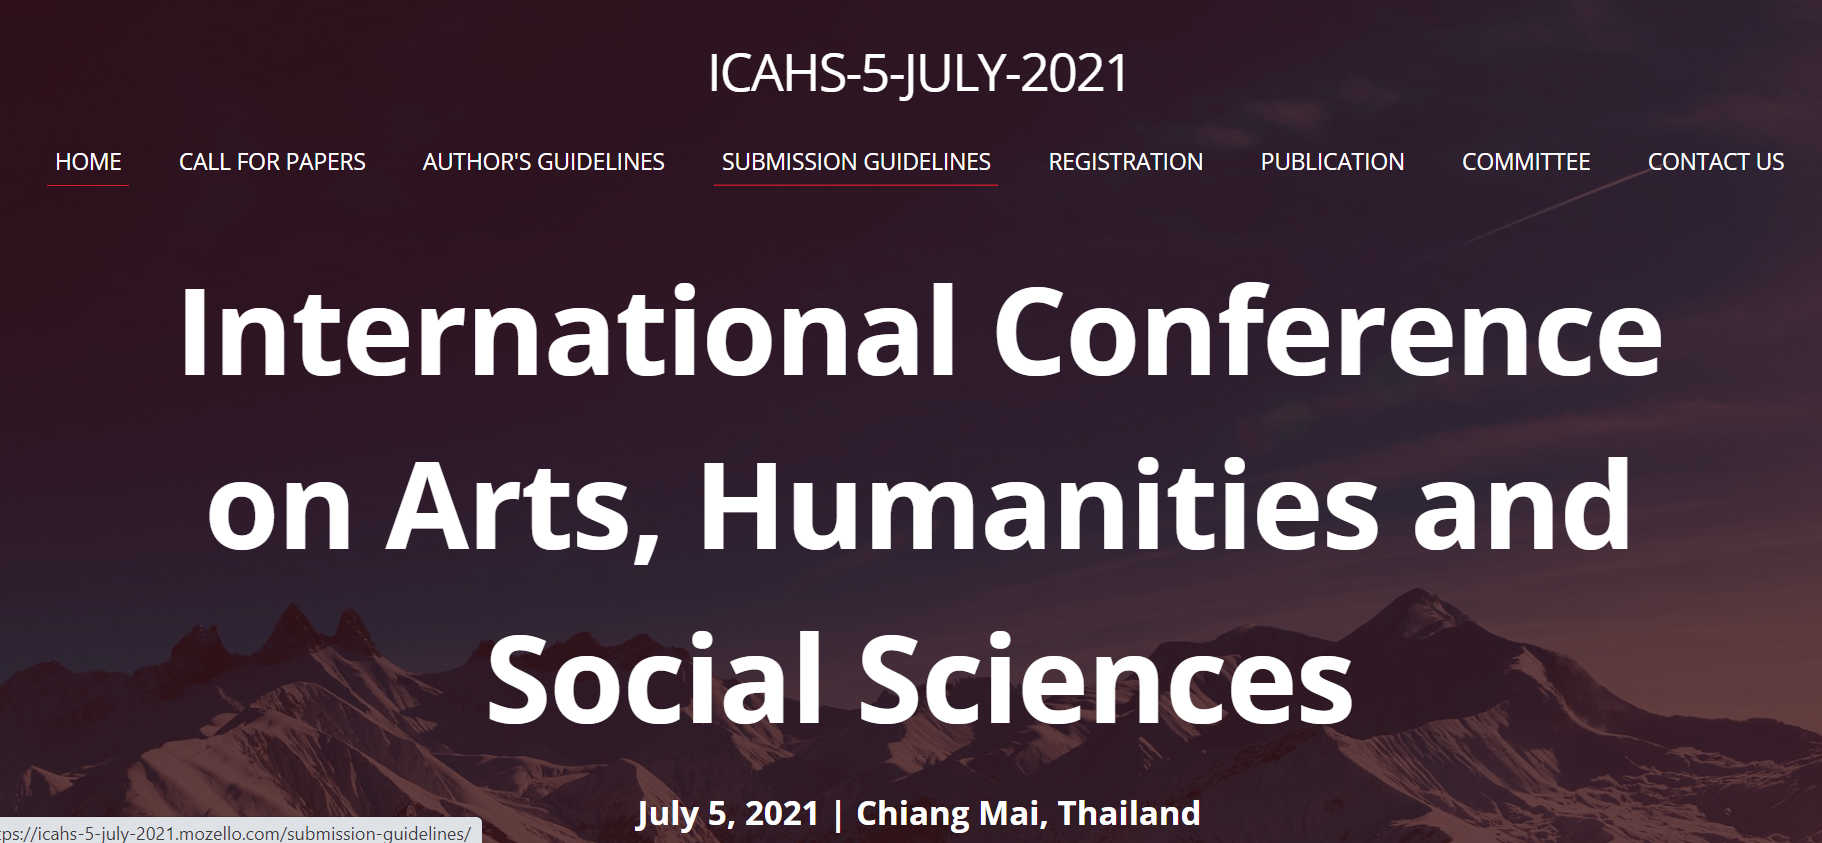 International Conference on Arts, Humanities and Social Sciences, Hiang Mai, Thailand,Chiang Mai,Thailand